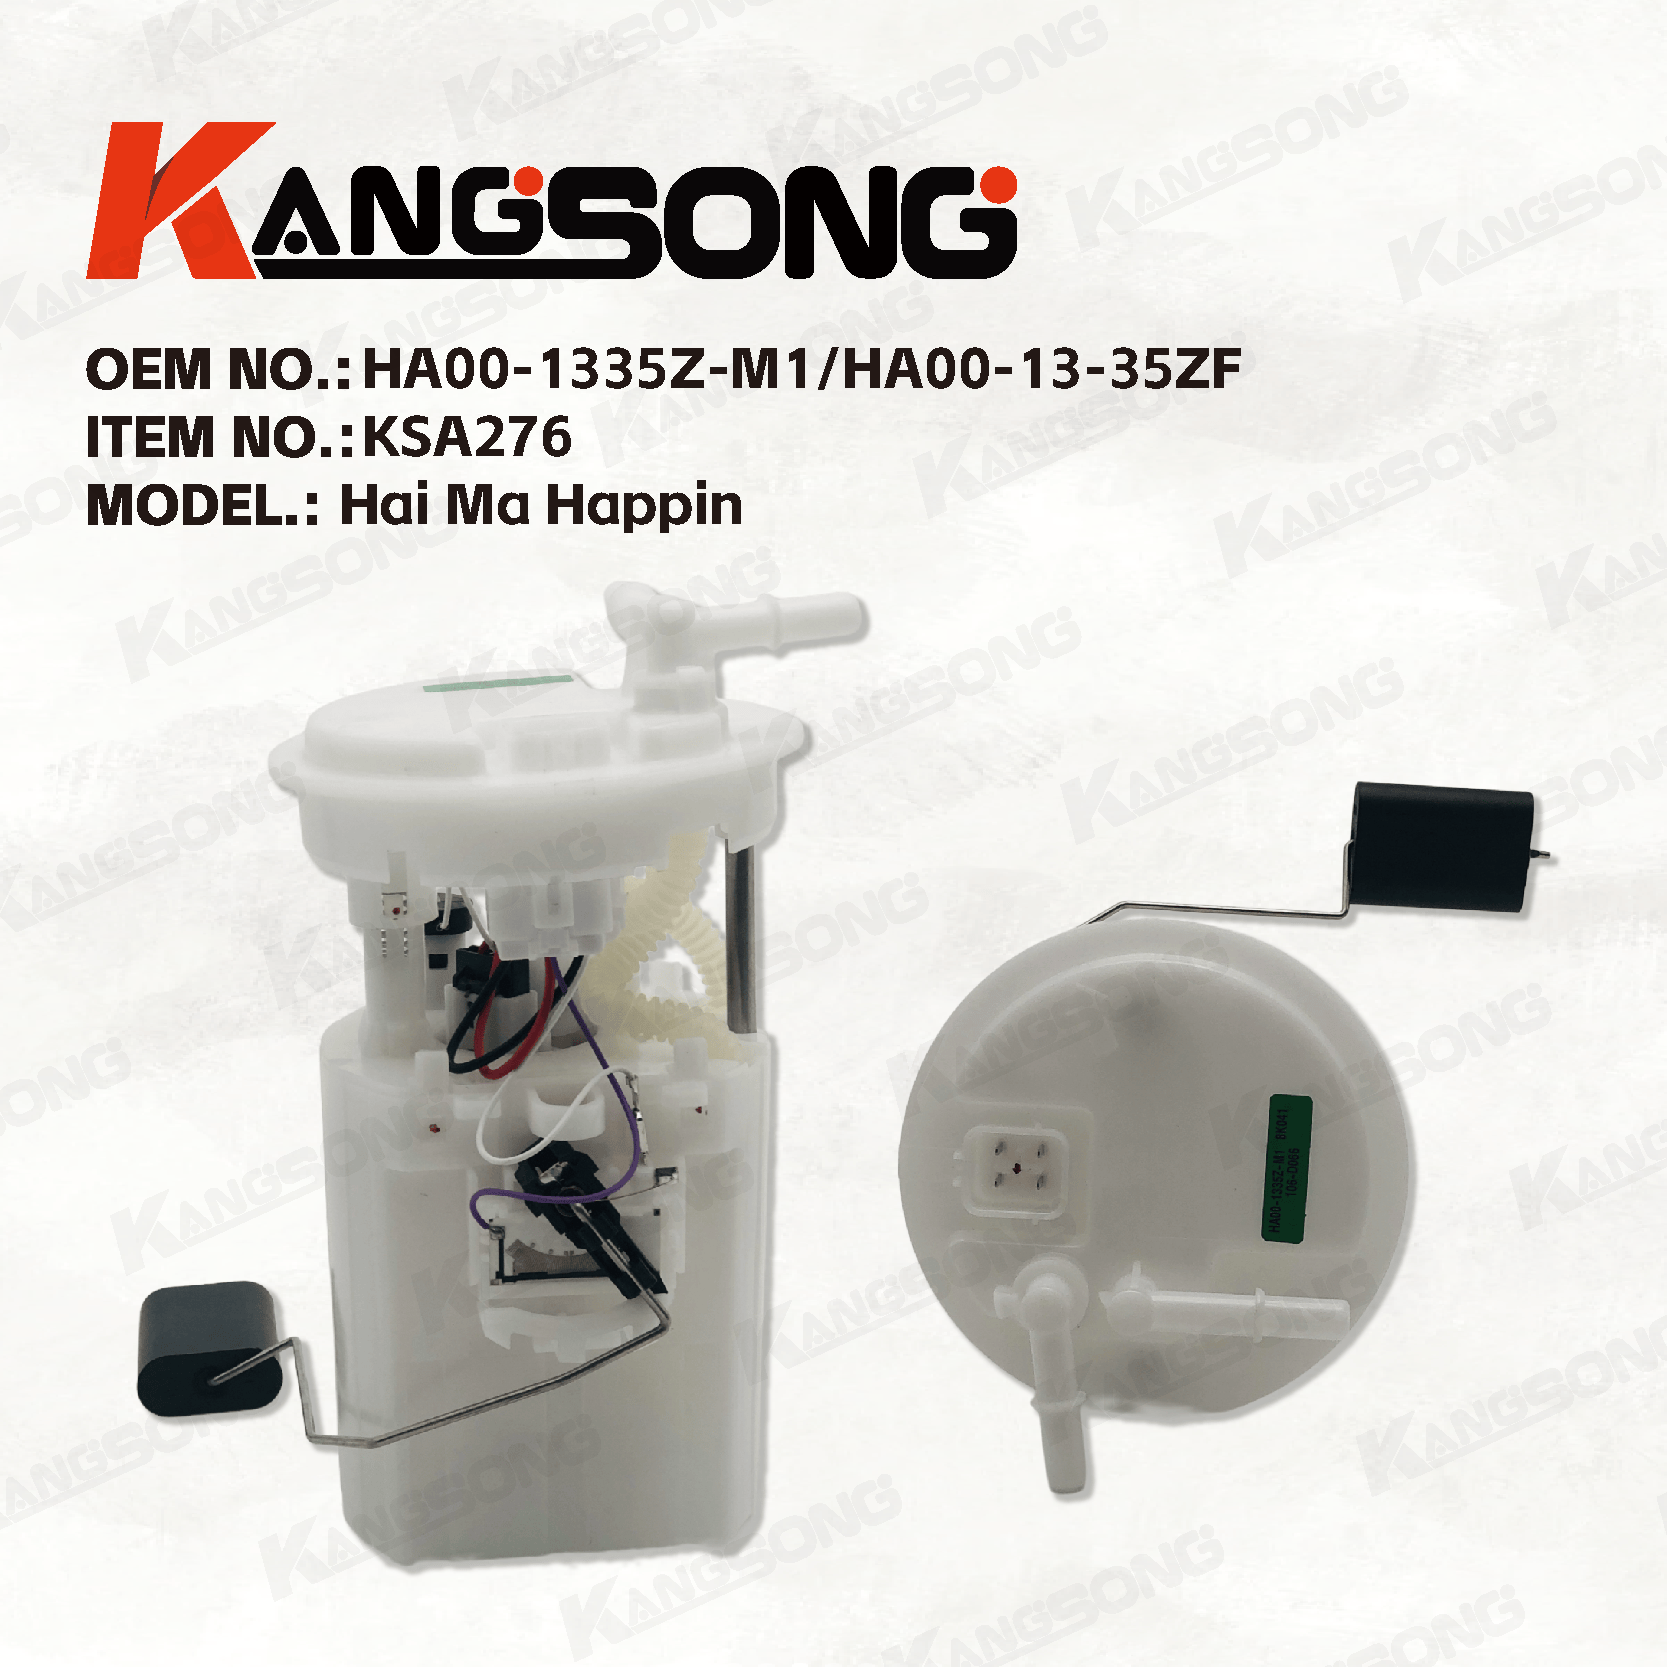 High performance electric engine fuel pump/HA00-1335Z-M1 HA00-13-35ZF/Fuel Pump Module Assembly for Hai Ma Happin